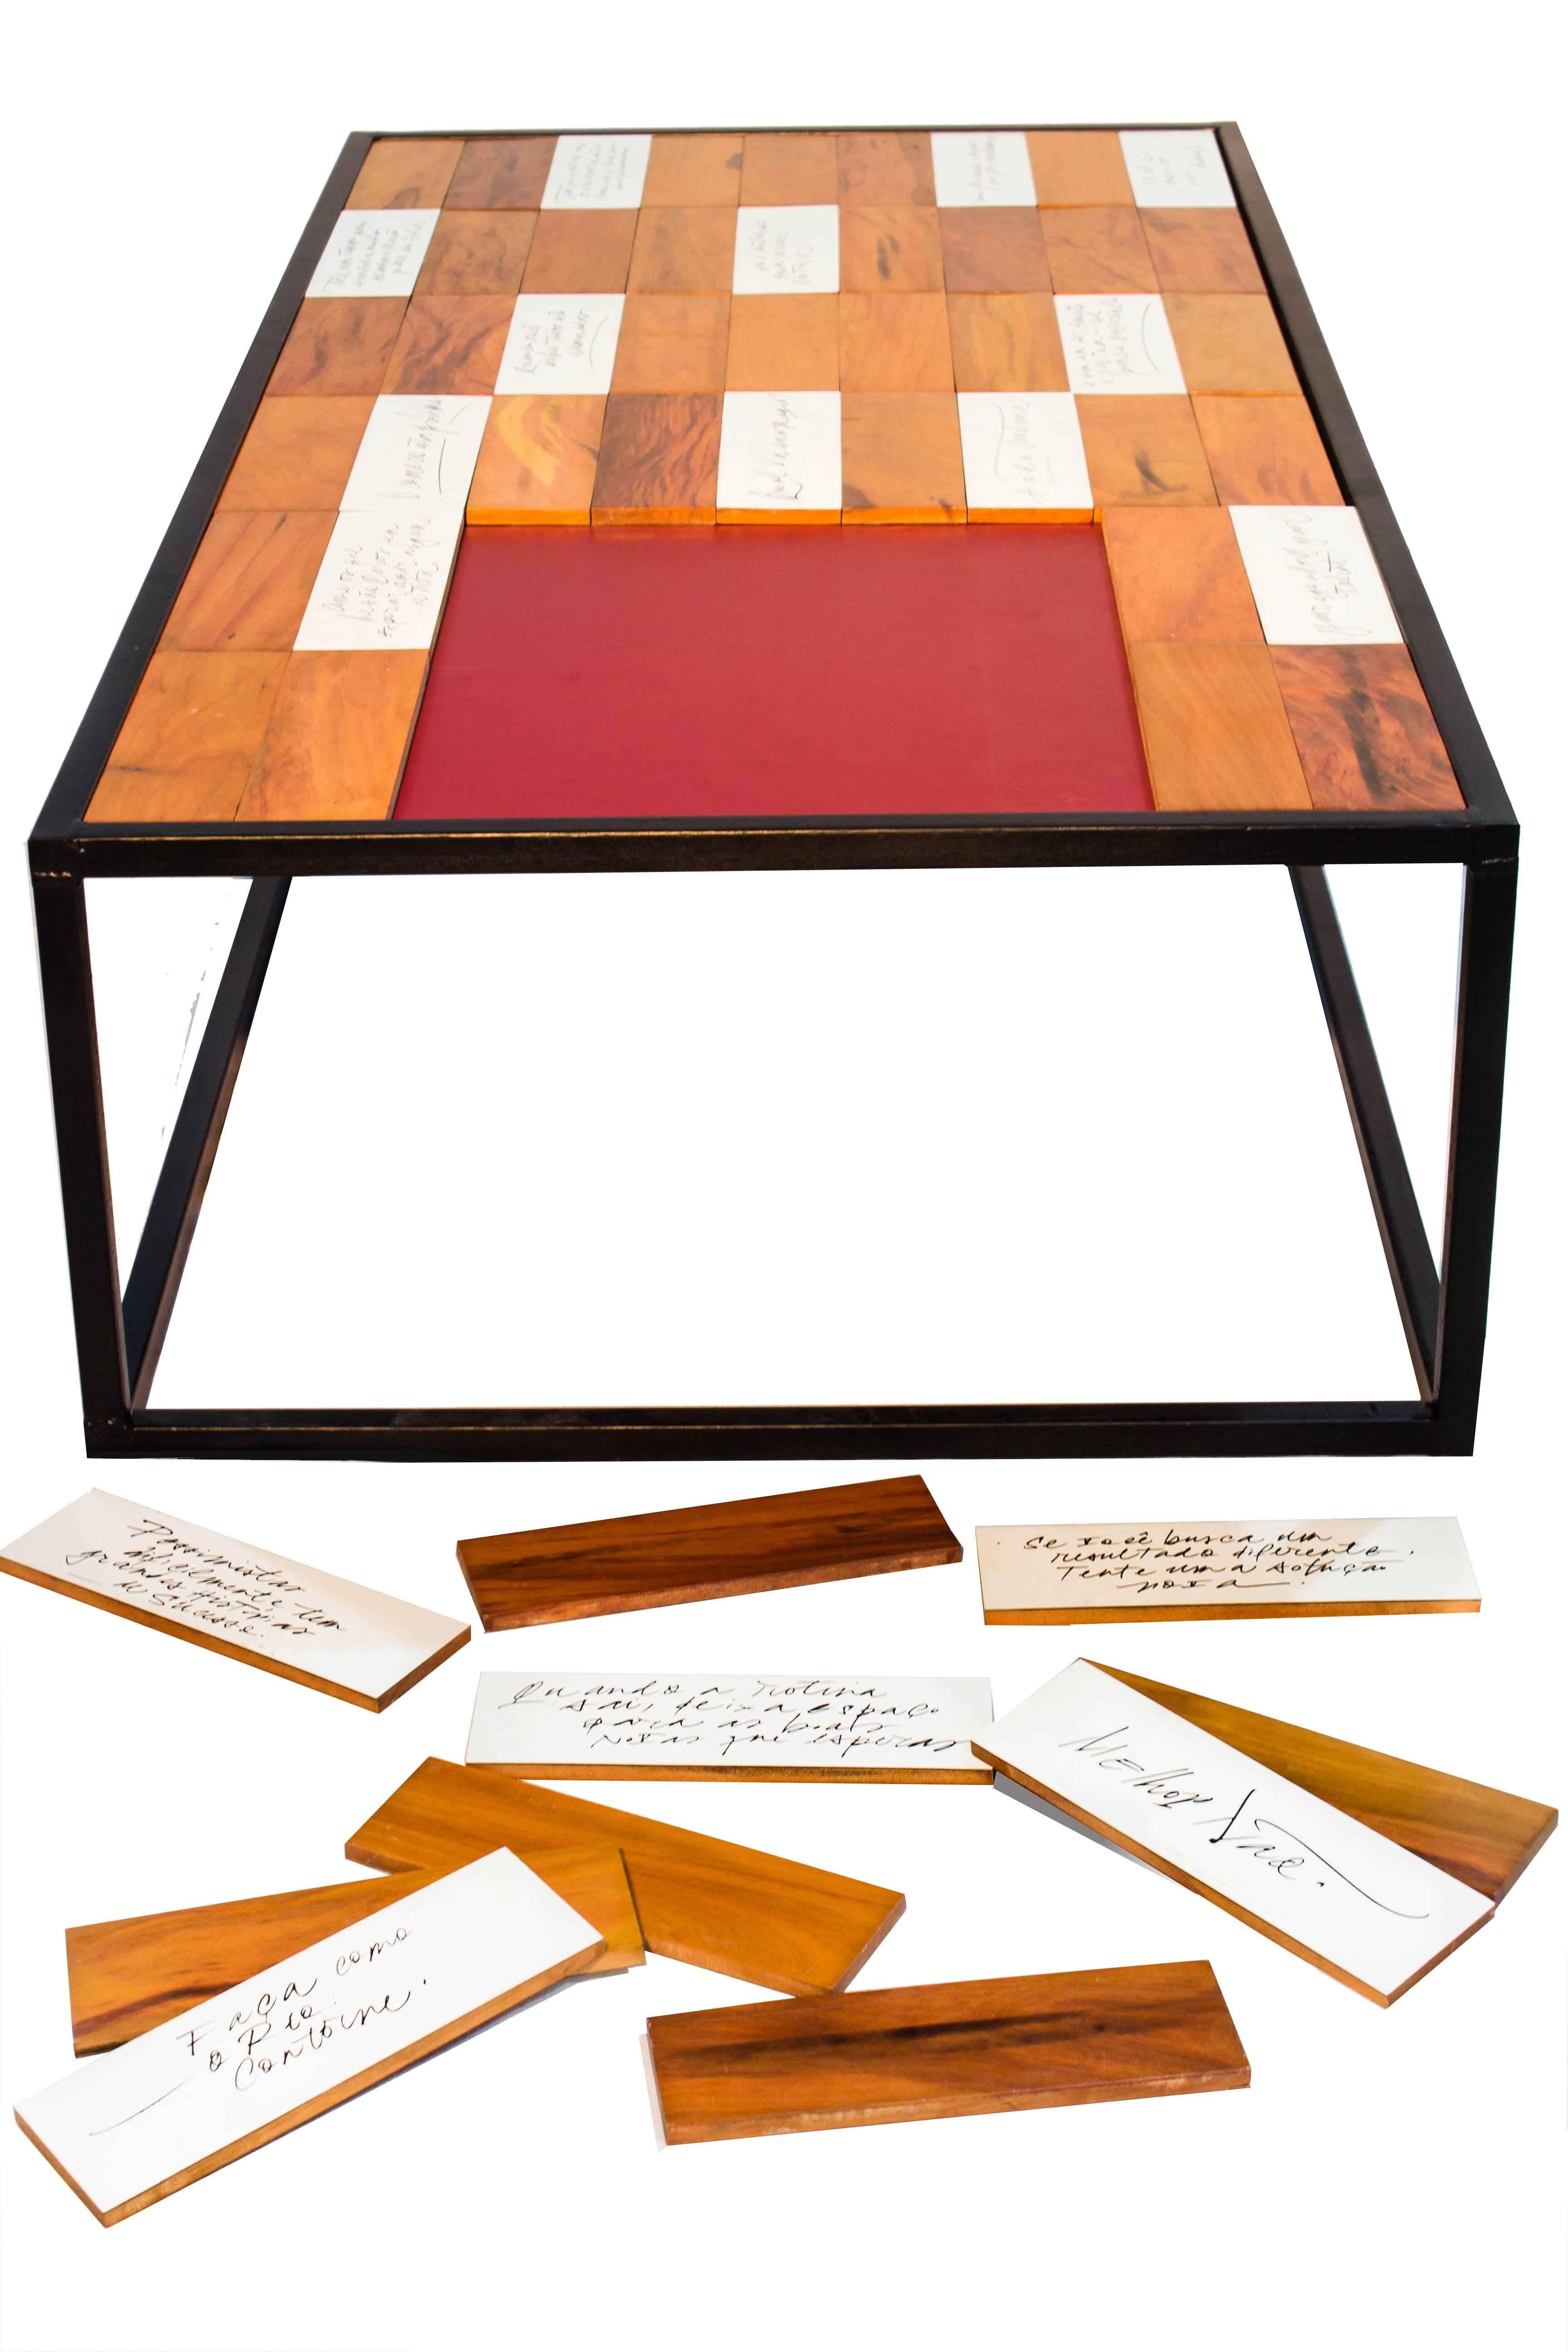 Lucky table is a coffee table topped with old Peroba wood parquet, recovered from demolitions with the back of each engraved with handwriting by a calligrapher invited. The inspiration comes from the Chinese fortune cookie, bringing a different